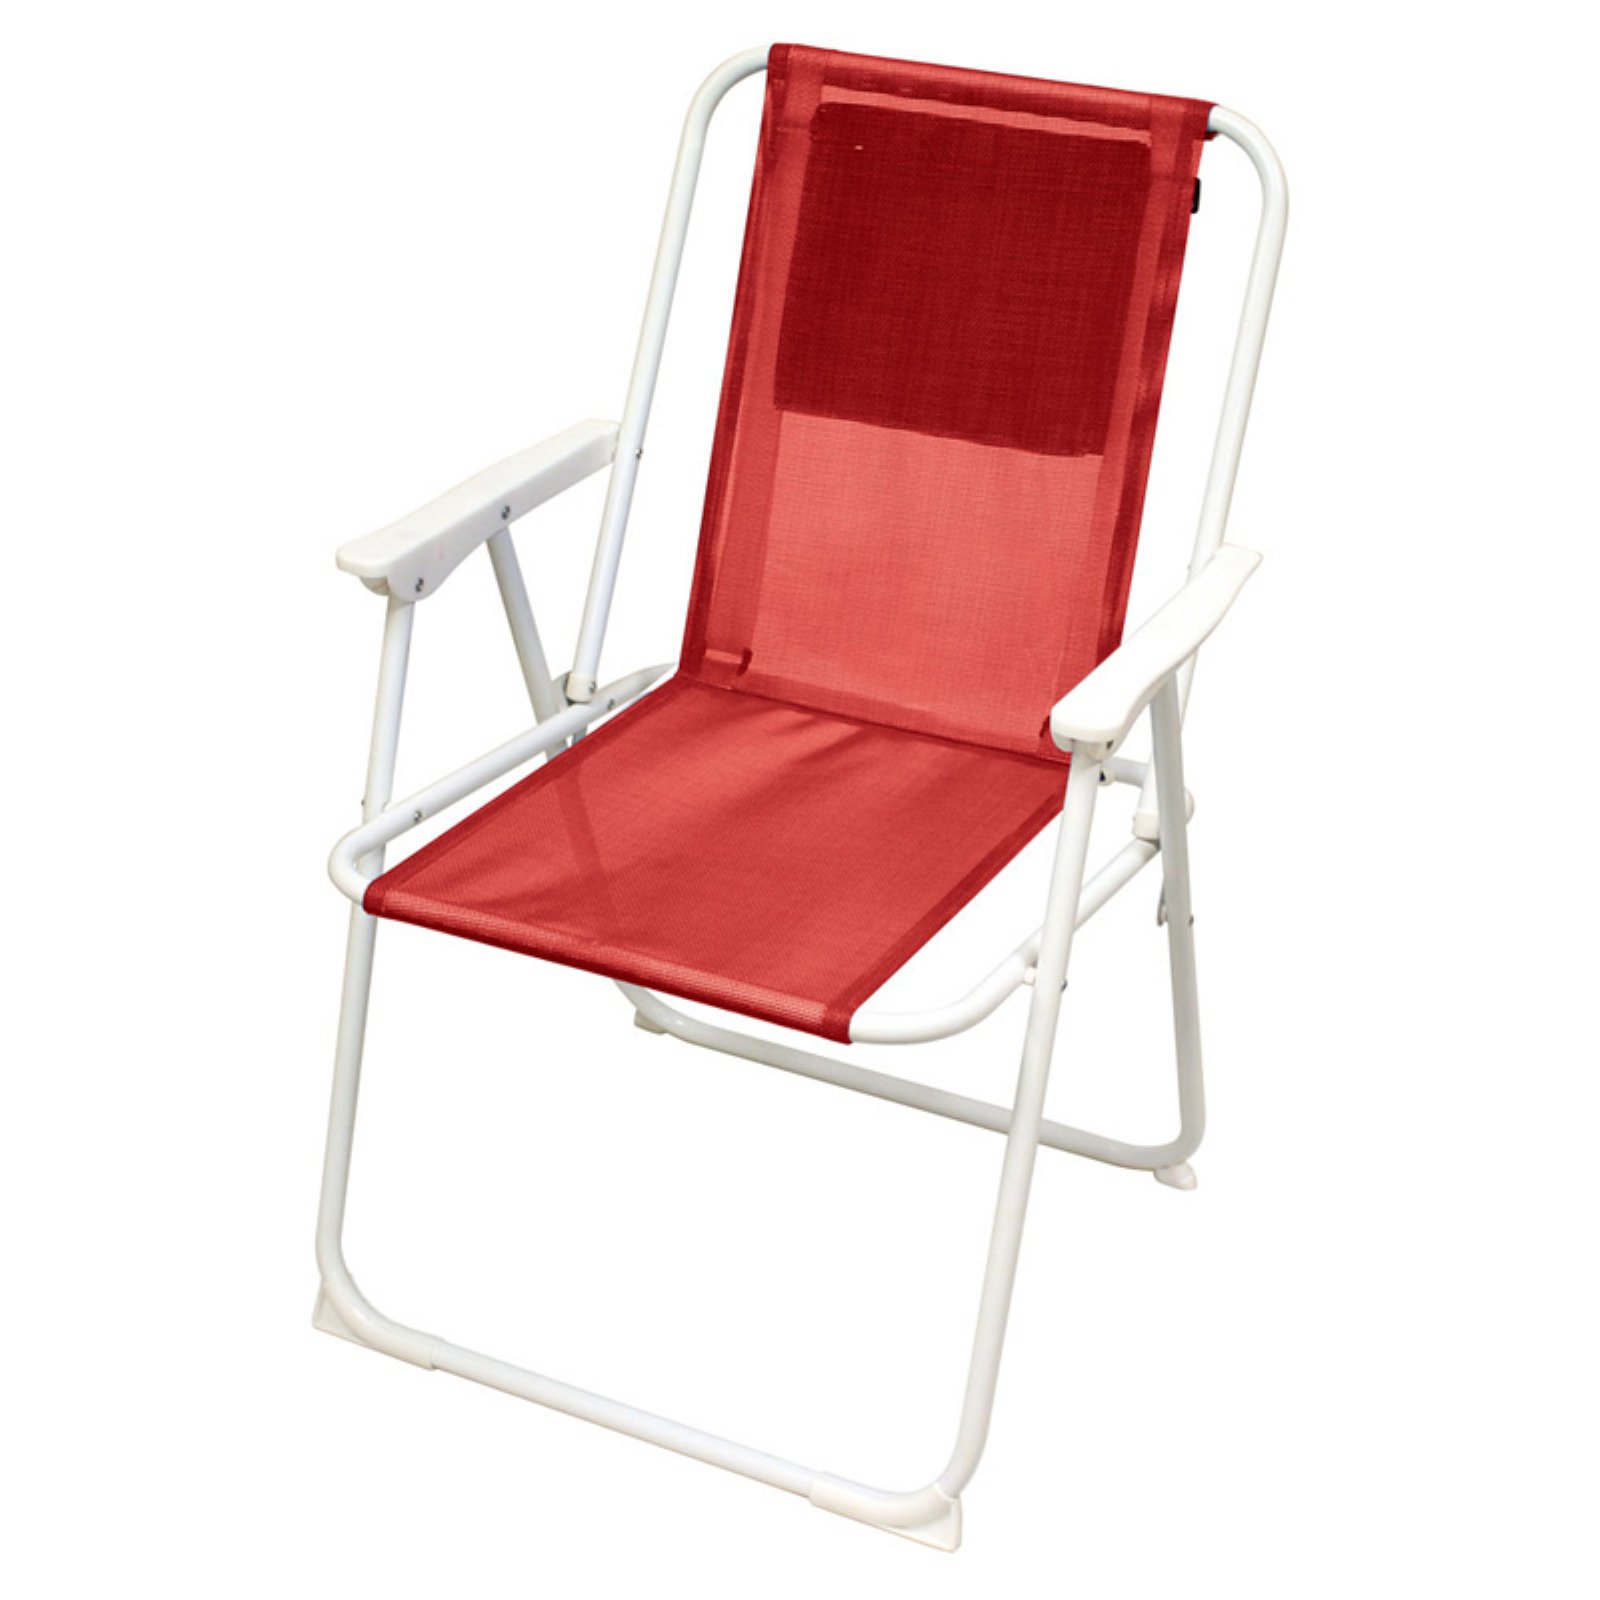 Preferred Nation Portable Beach Chair - image 1 of 3